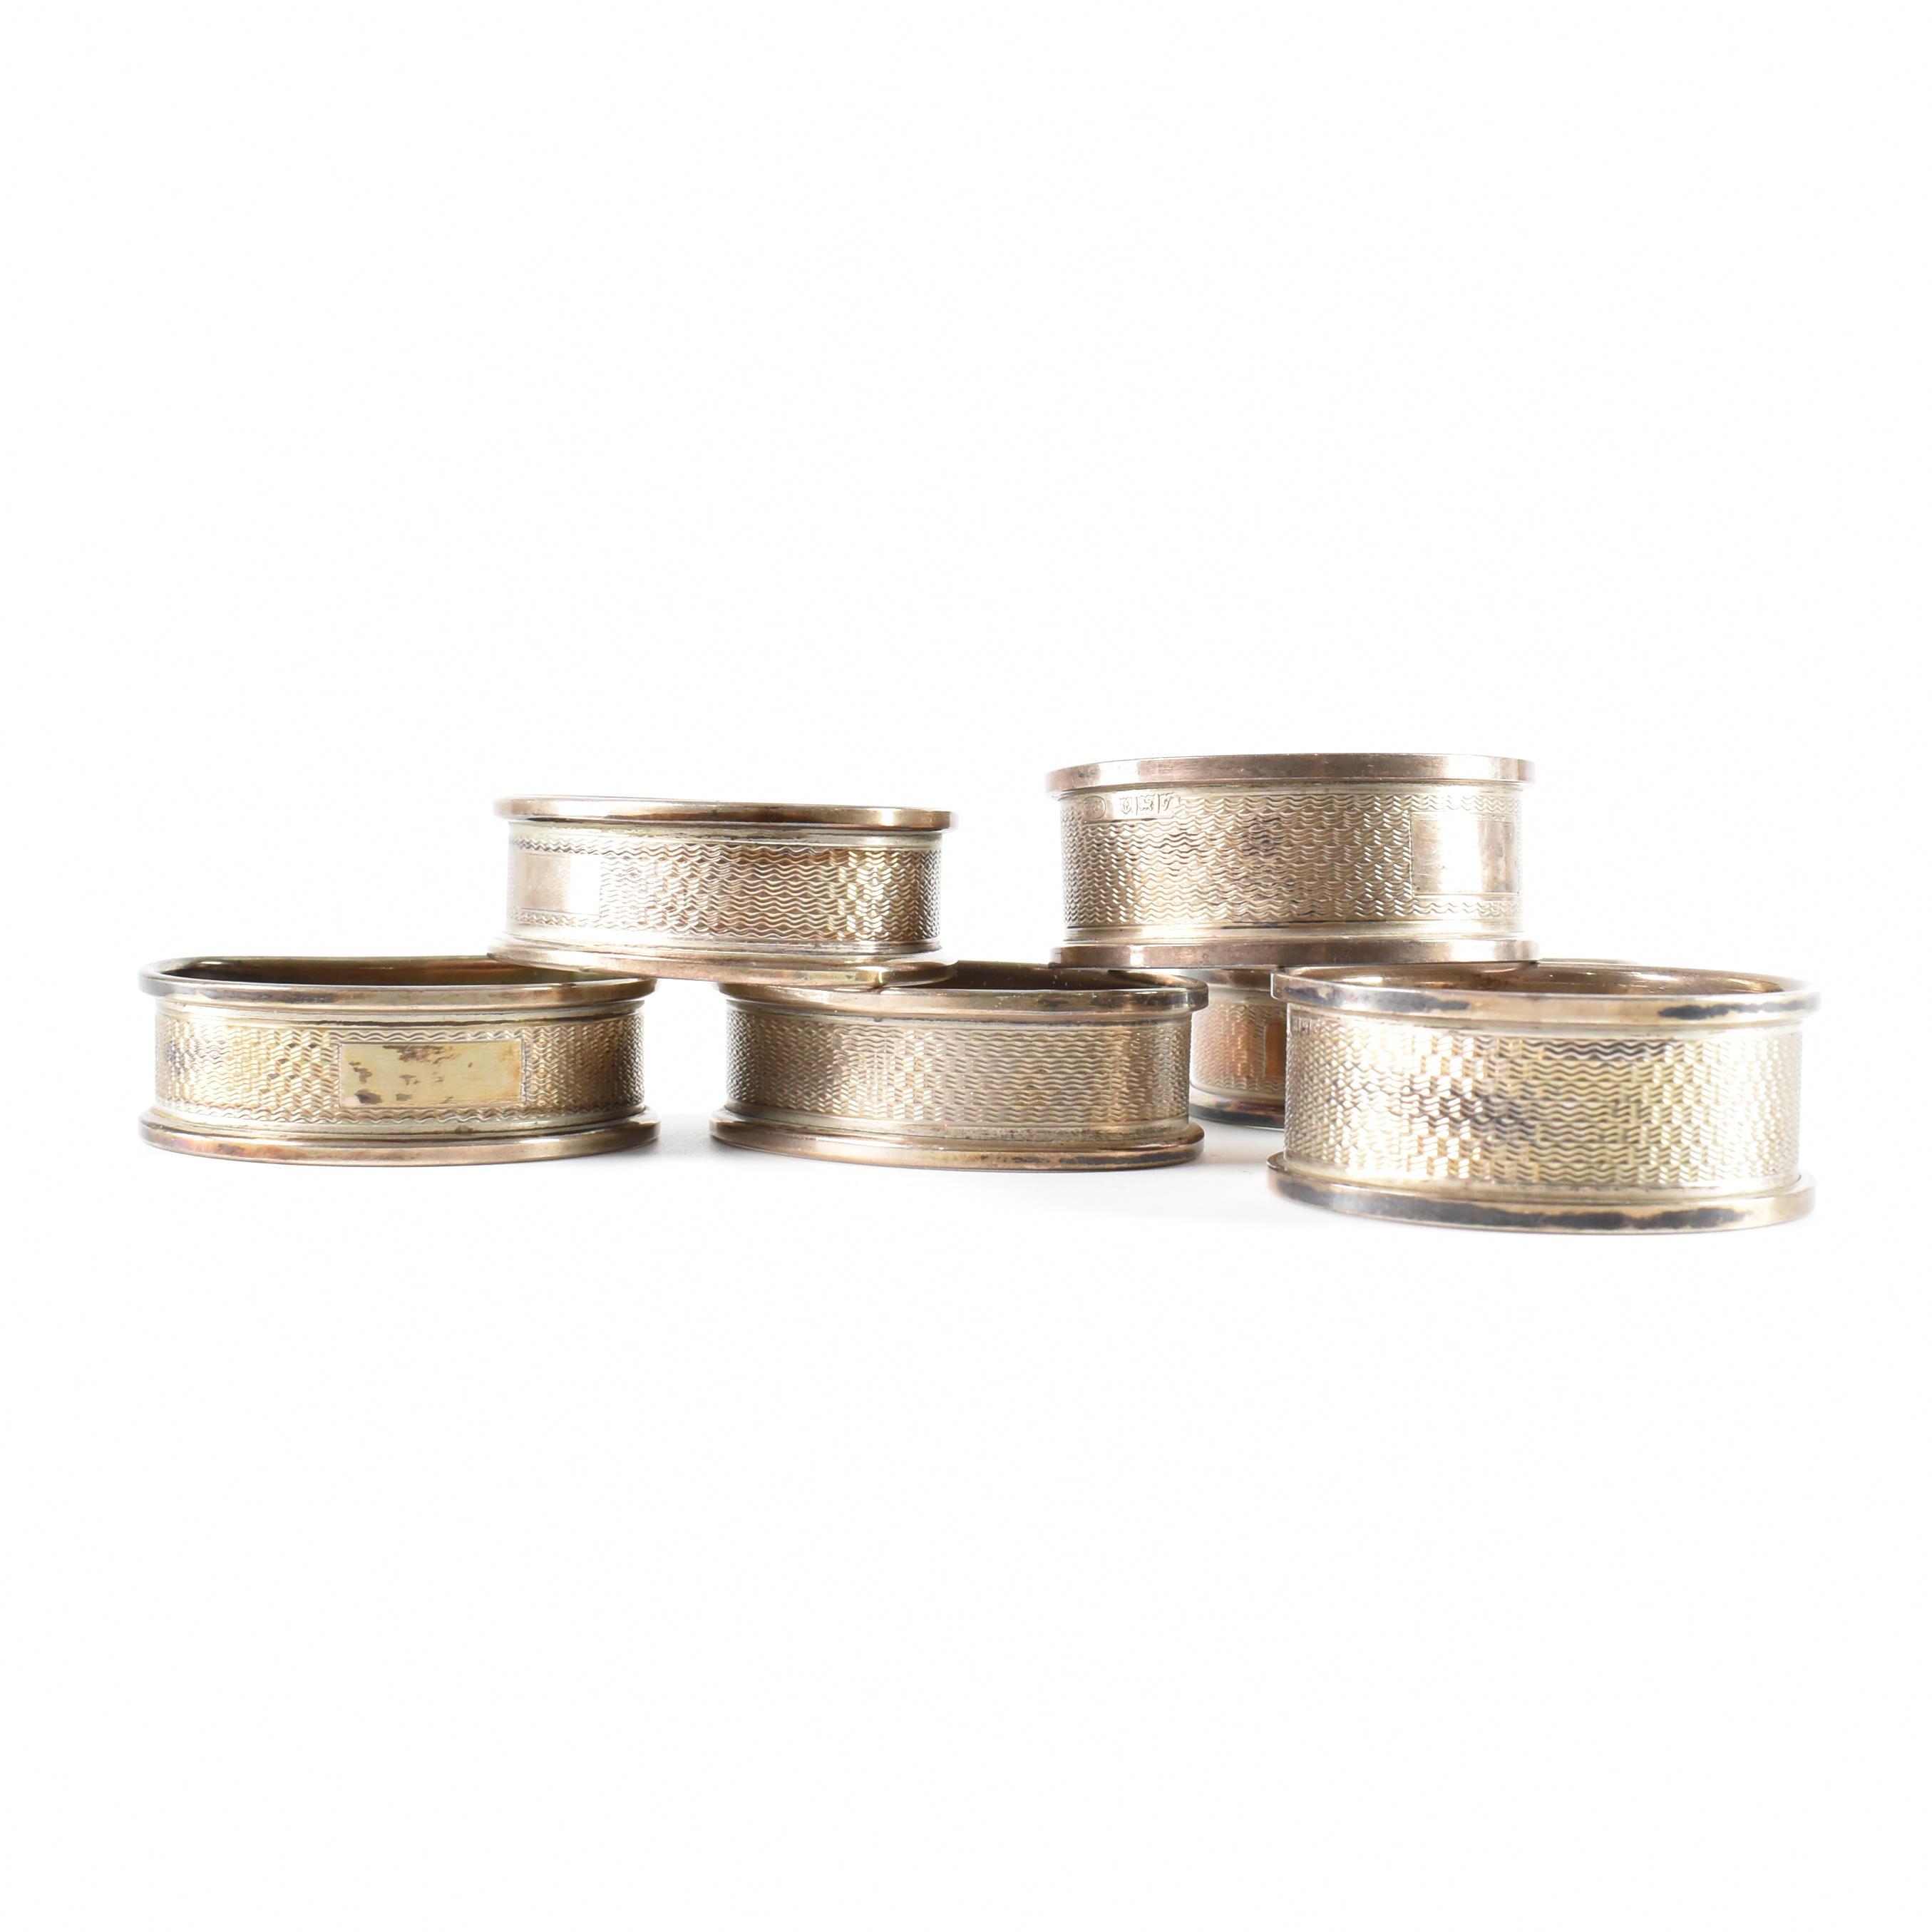 SIX 20TH CENTURY HALLMARKED SILVER NAPKIN RINGS OF VARIOUS SHAPES